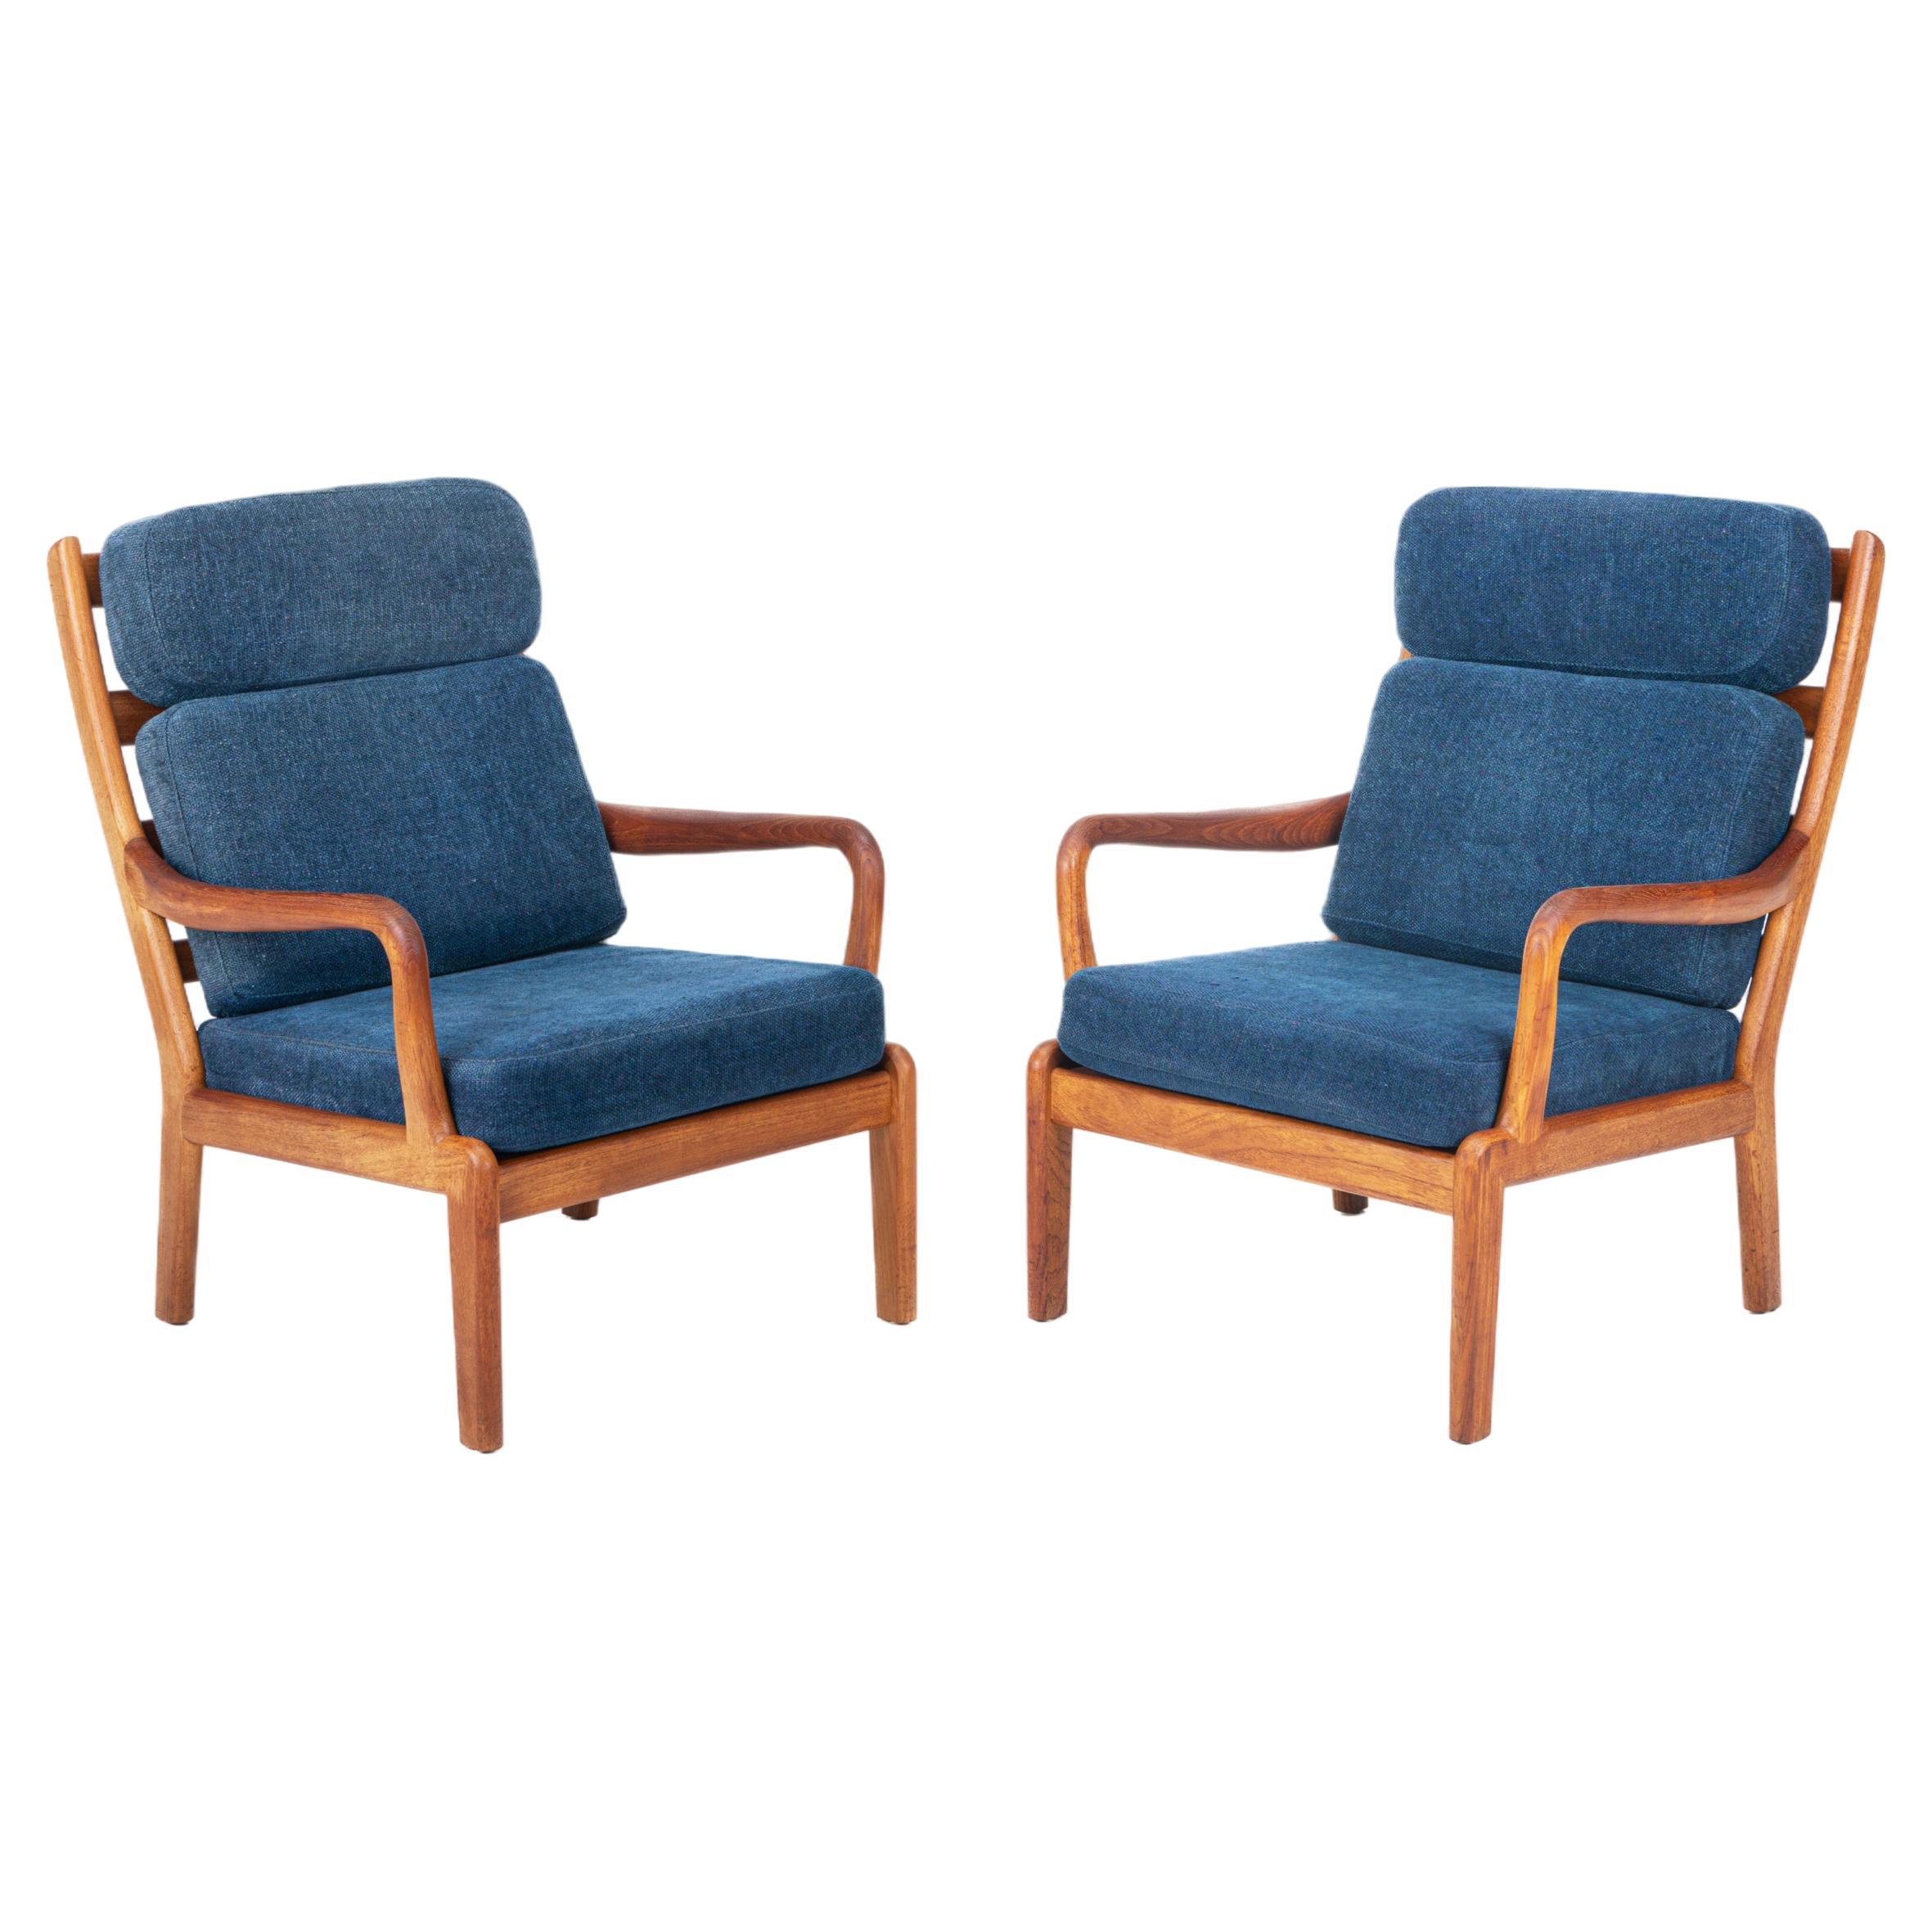 Pair of Lounge chairs by L. Olsen & Søn, Denmark